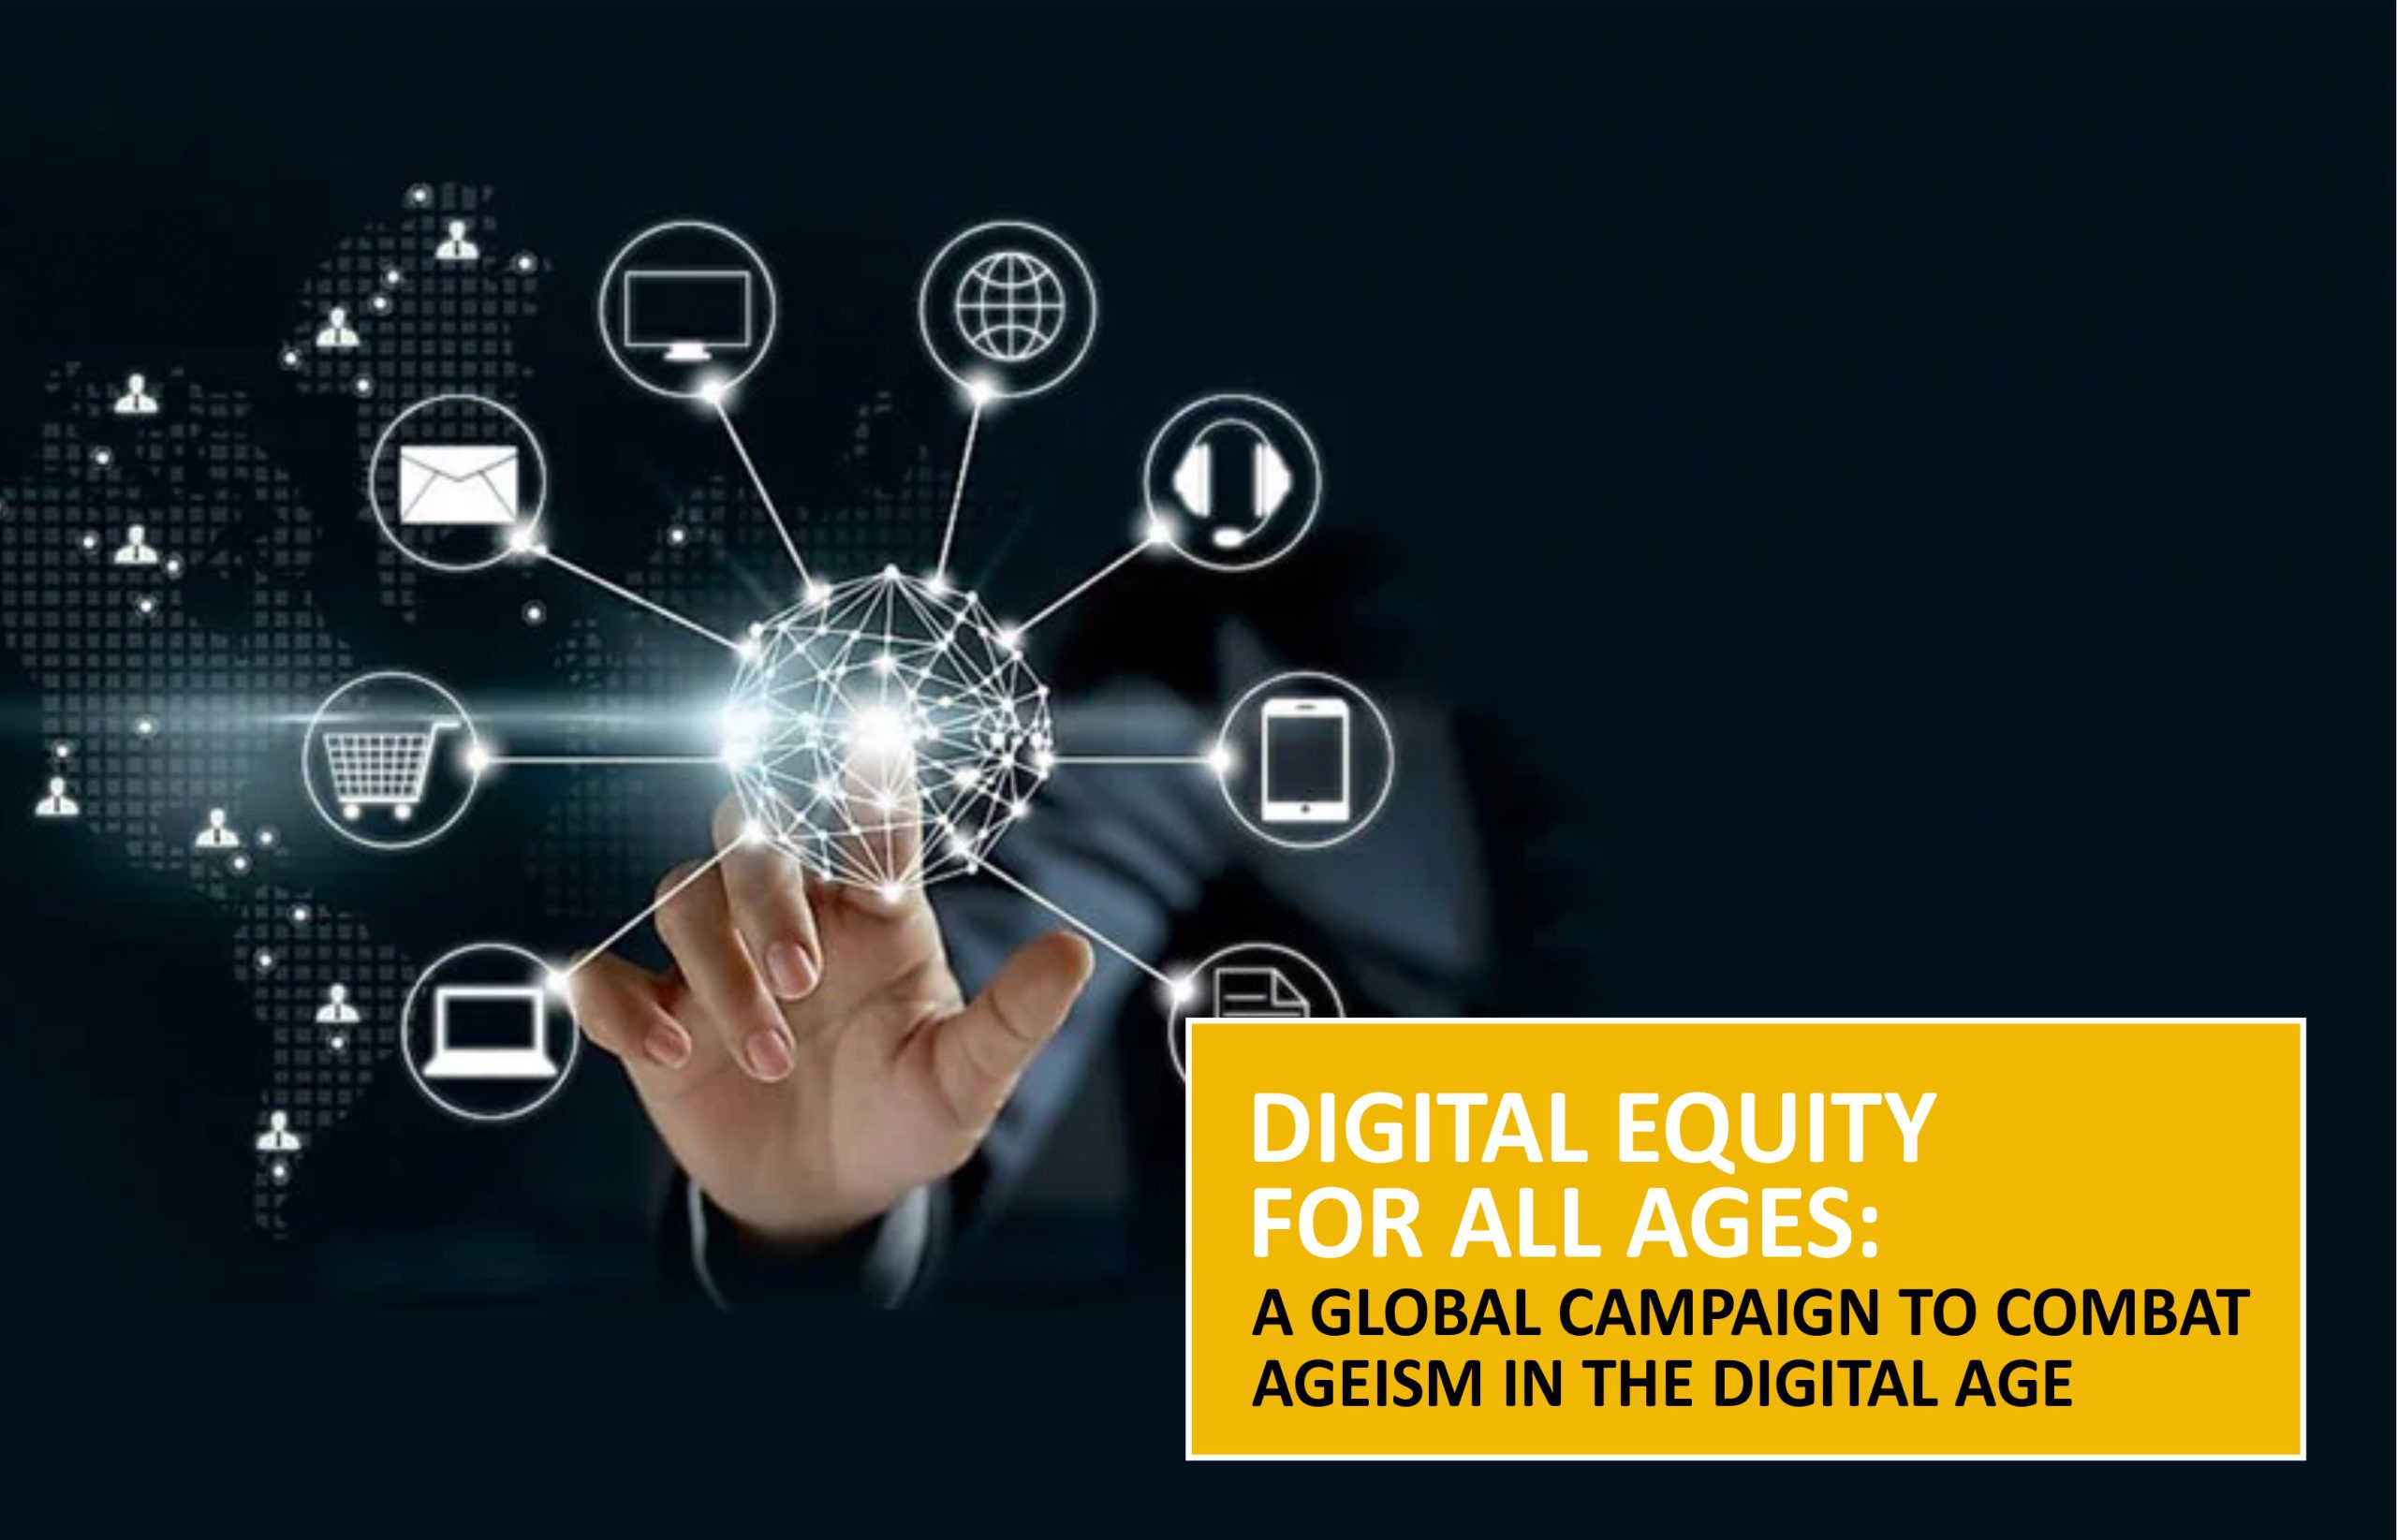 Digital Equity for All Ages: A Global Campaign to Combat Ageism in the Digital Age